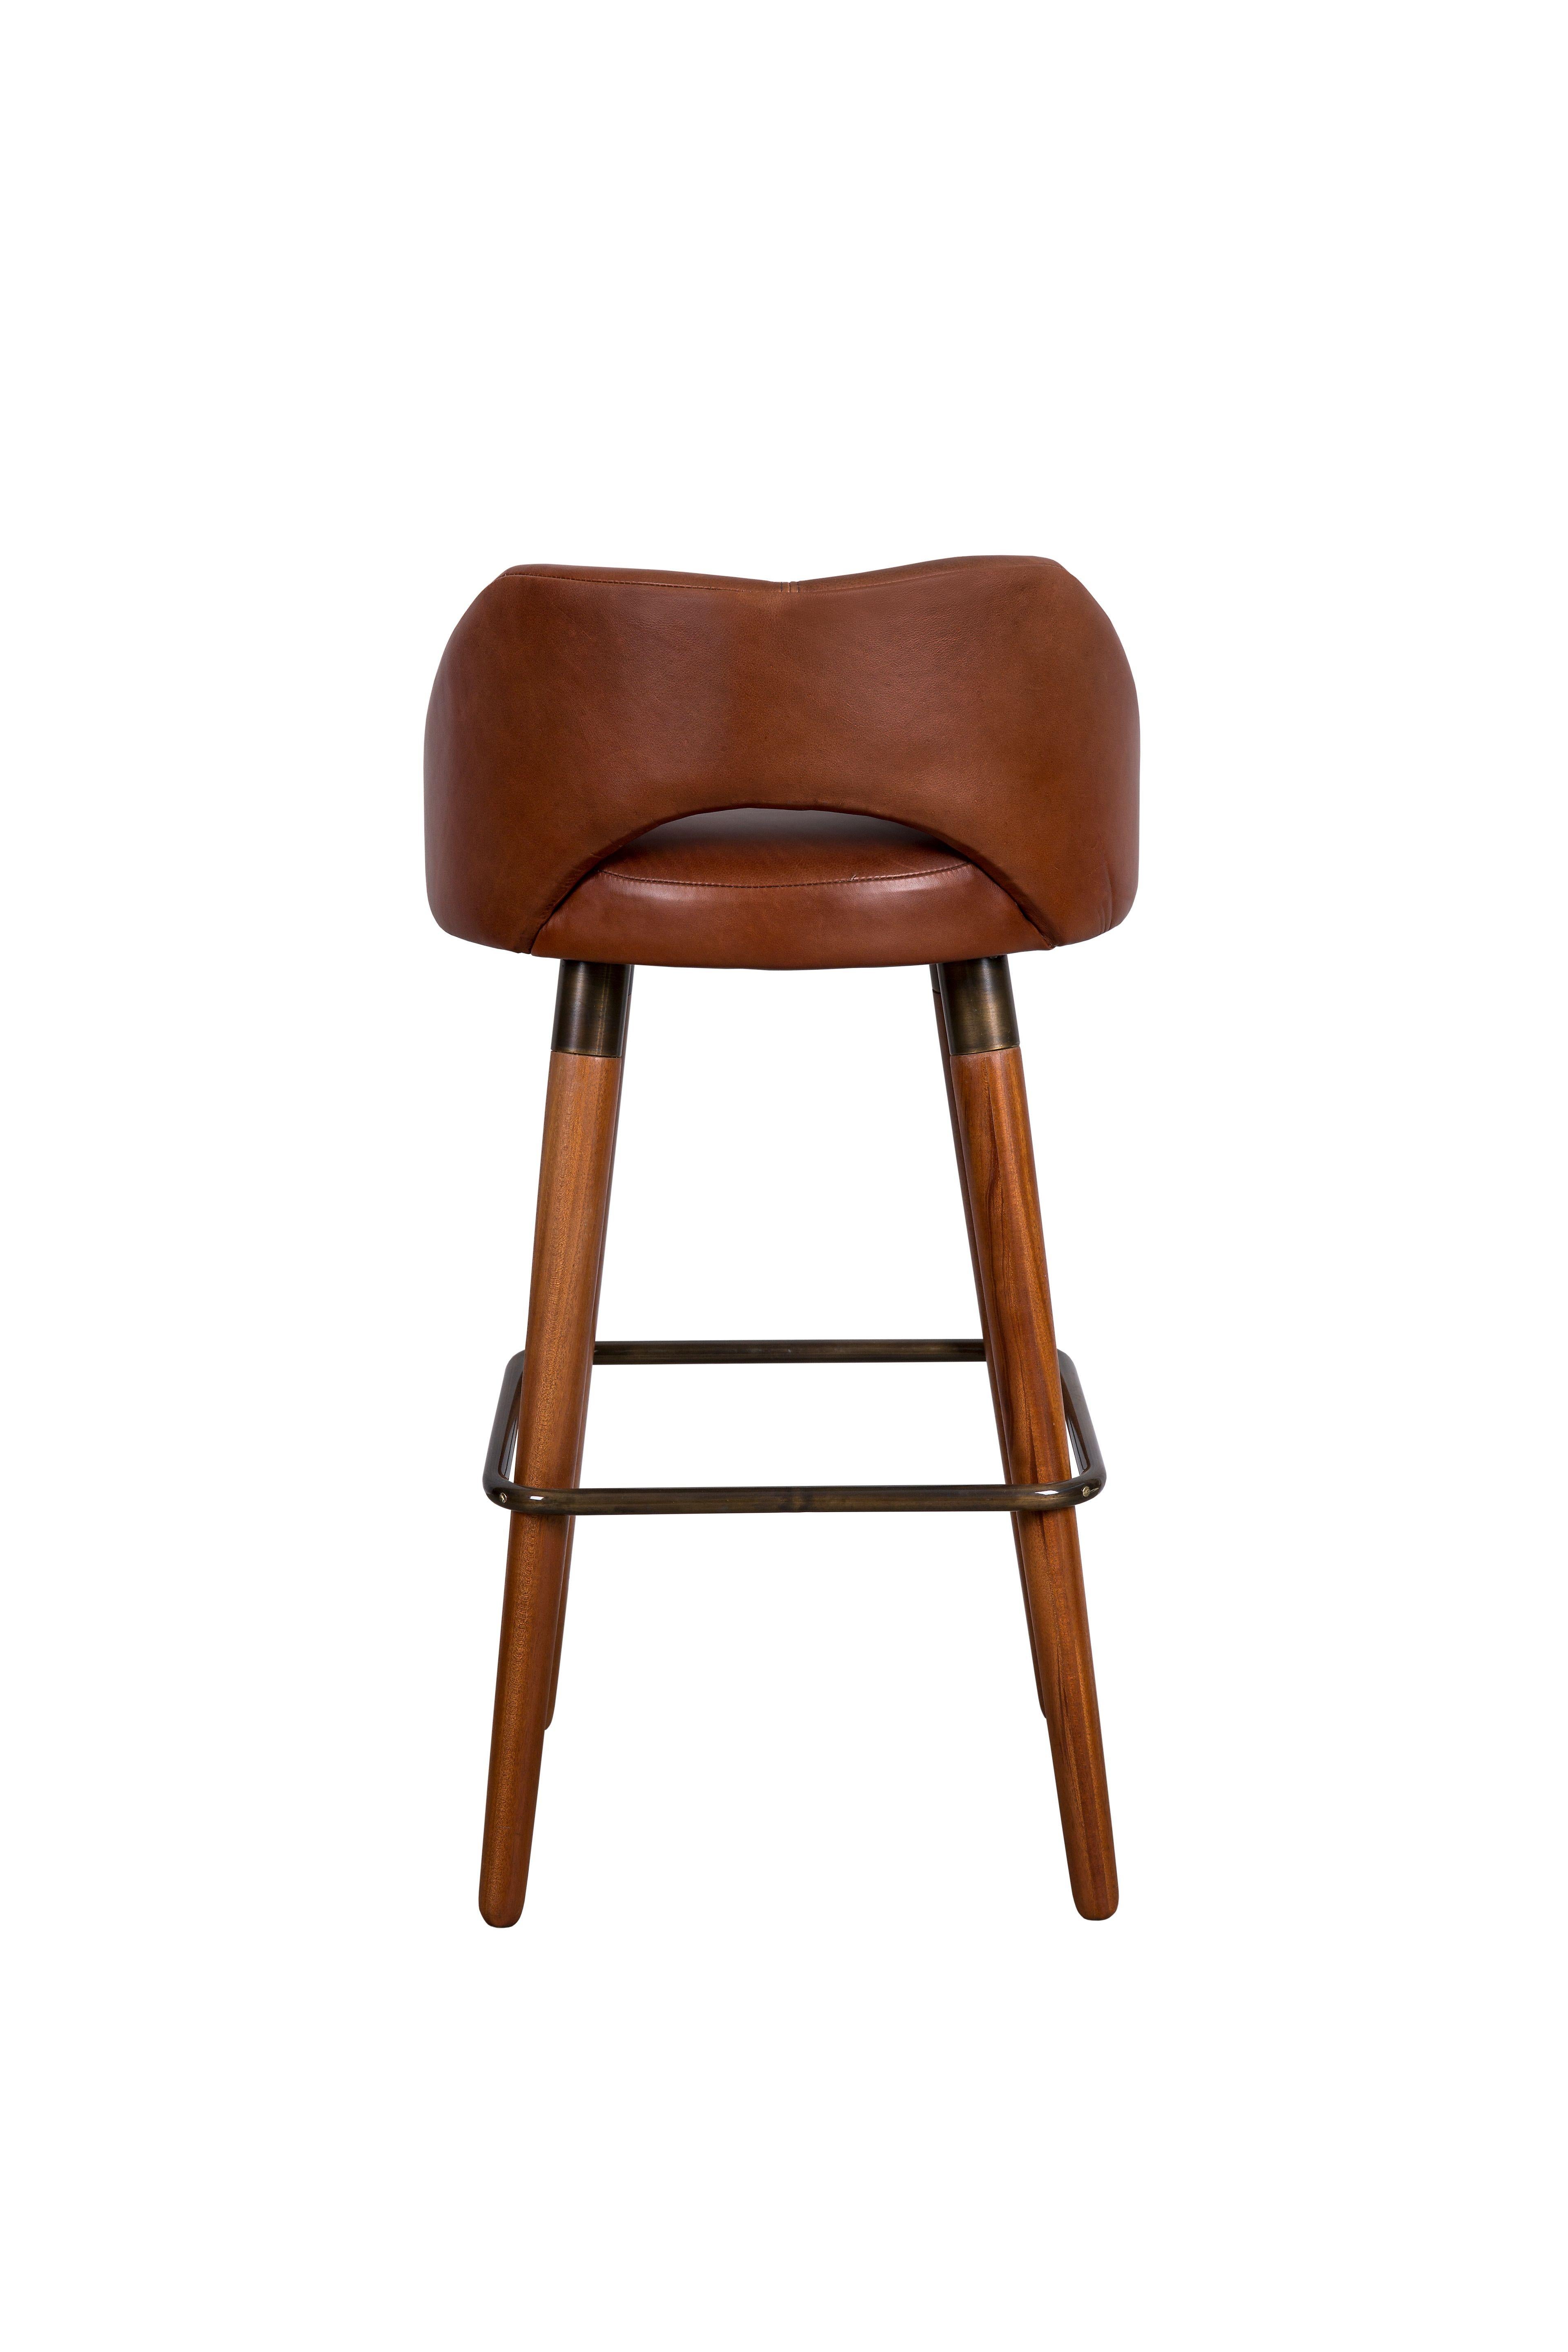 Plantation Bar Stool by Egg Designs
Dimensions: 50 L X 50 D X 98 H cm
Materials: Bronze Coated Steel, African Mahogany, Leather Upholstery

Founded by South Africans and life partners, Greg and Roche Dry - Egg is a unique perspective in contemporary